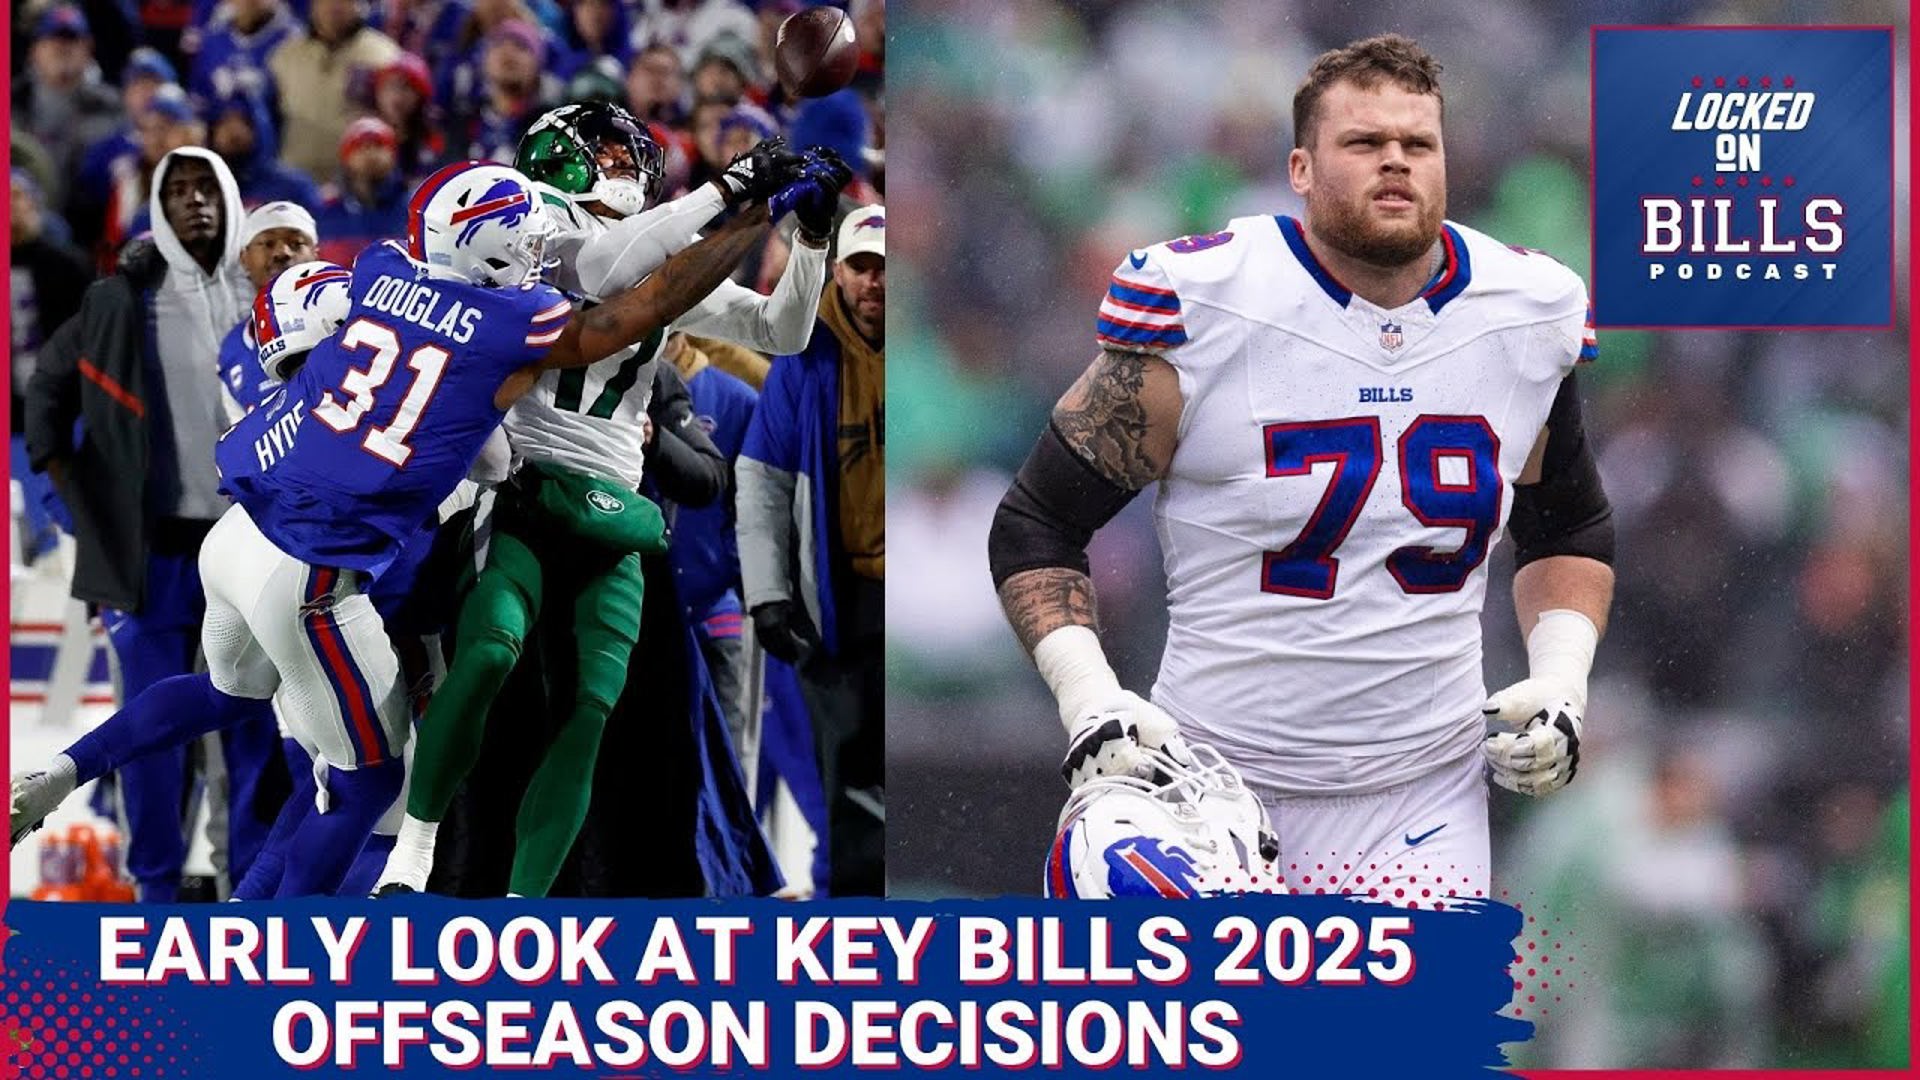 Early look at key decisions for Buffalo Bills in 2025 offseason to keep building around Josh Allen